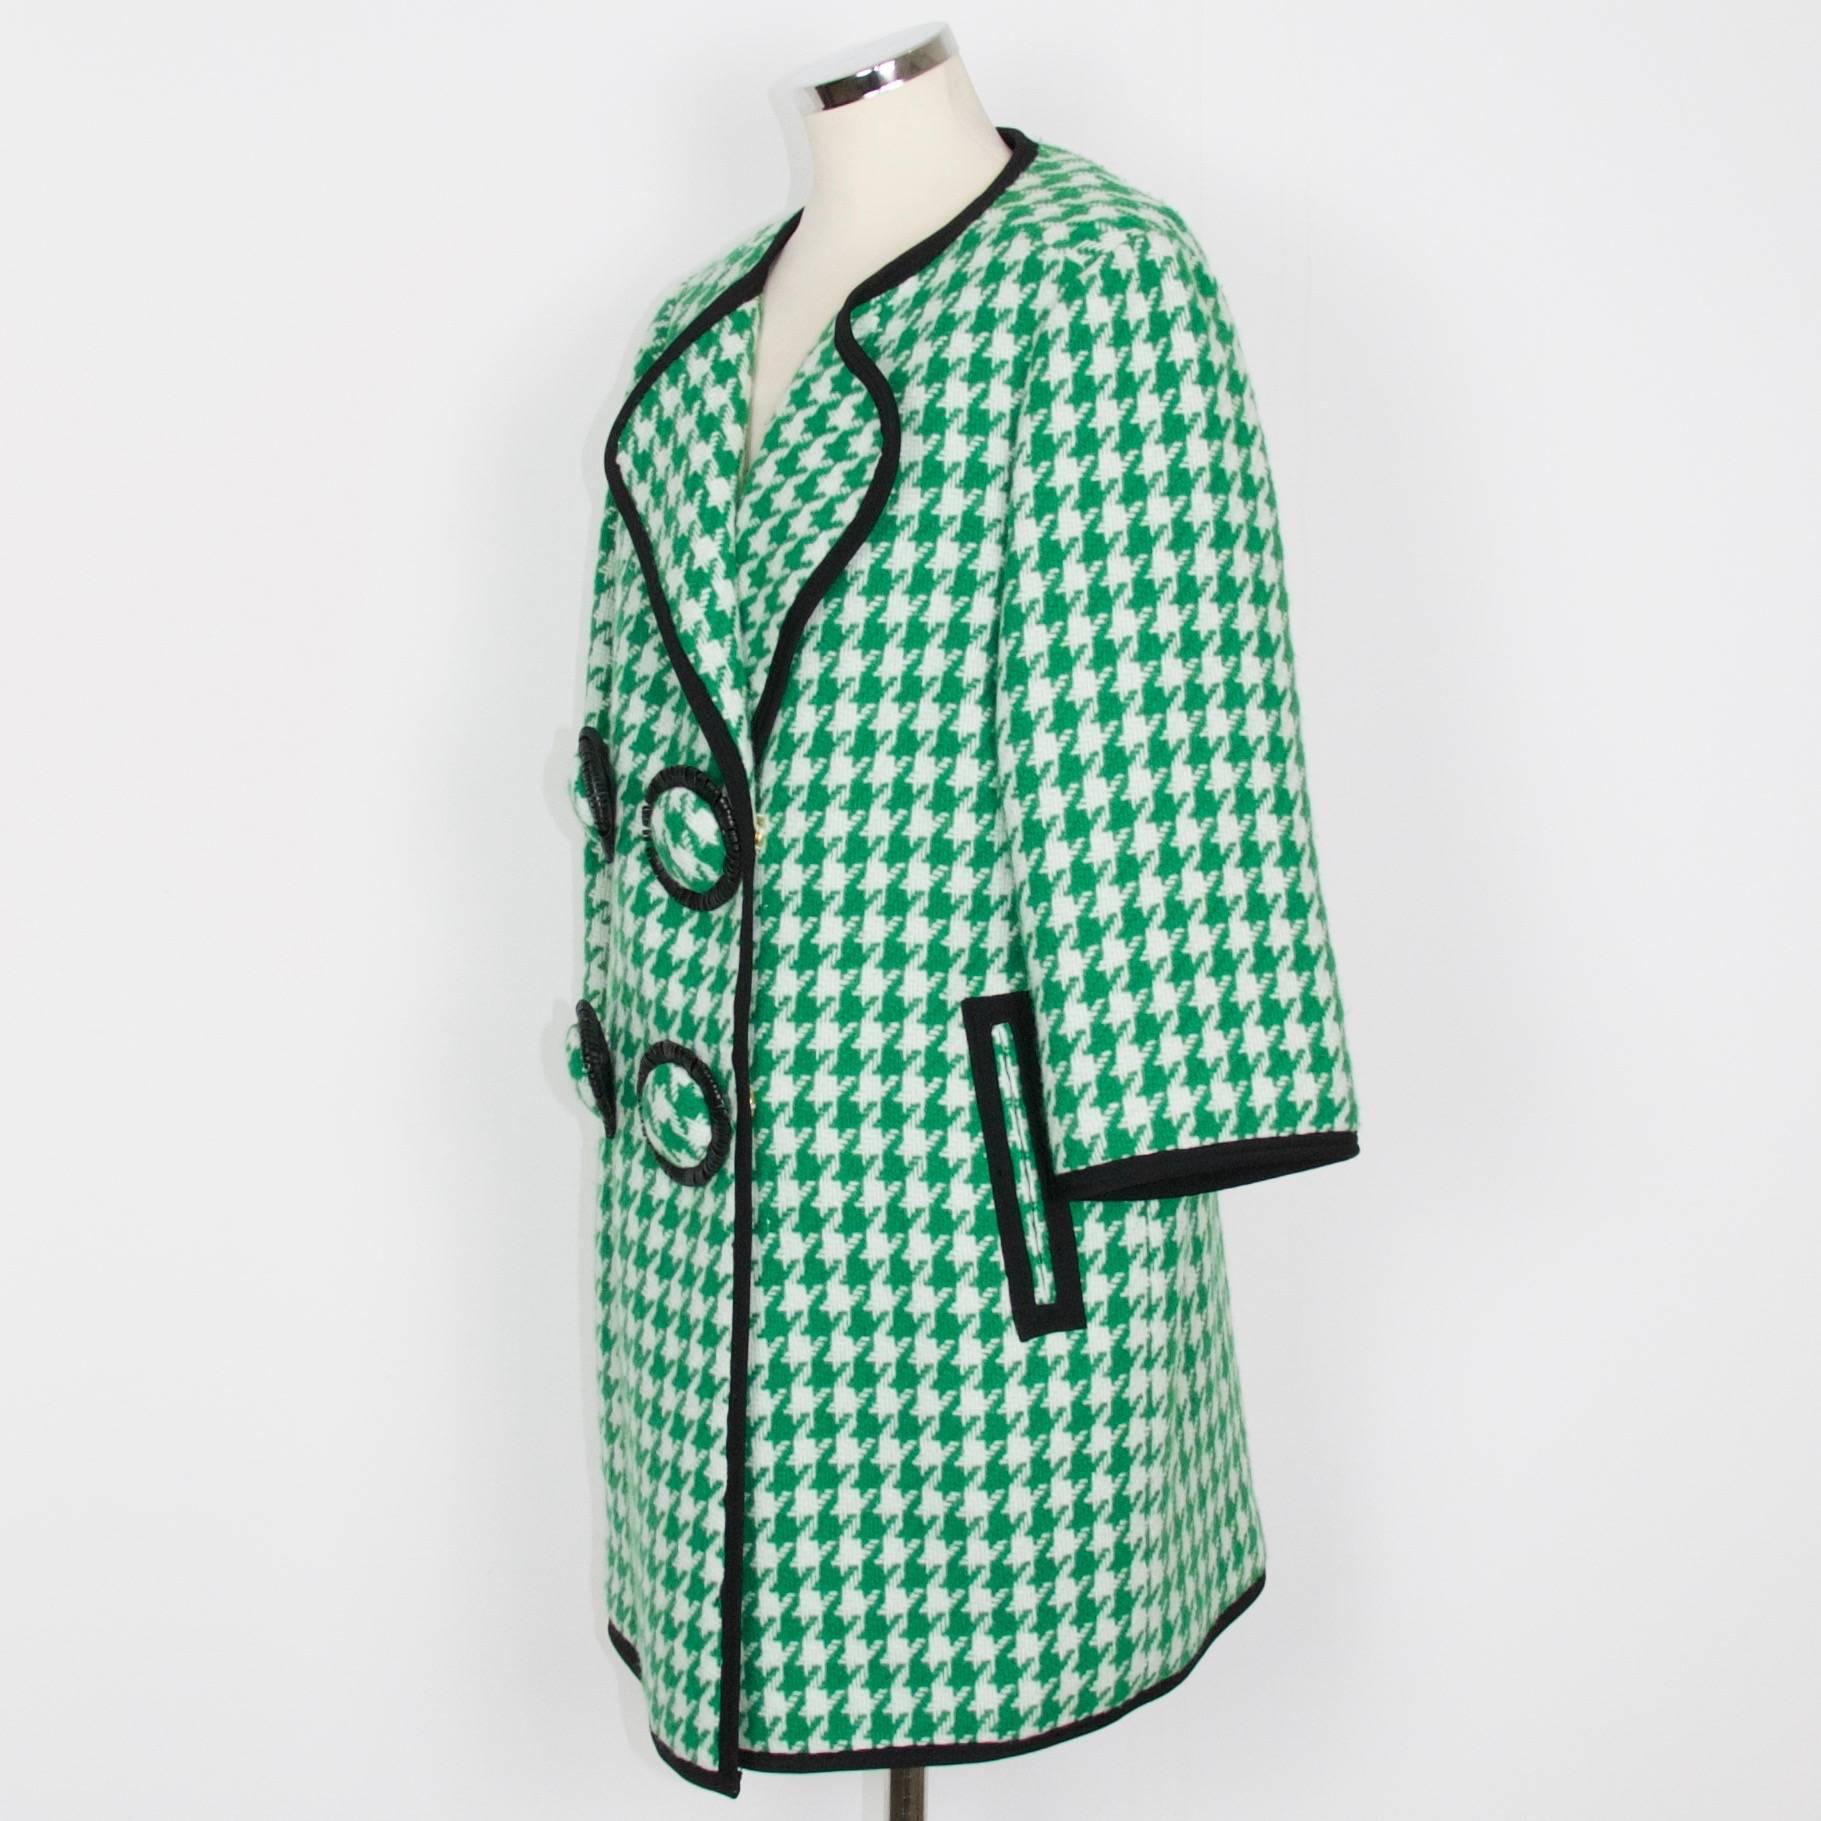 Pure new wool green and black houndstooth check coat.